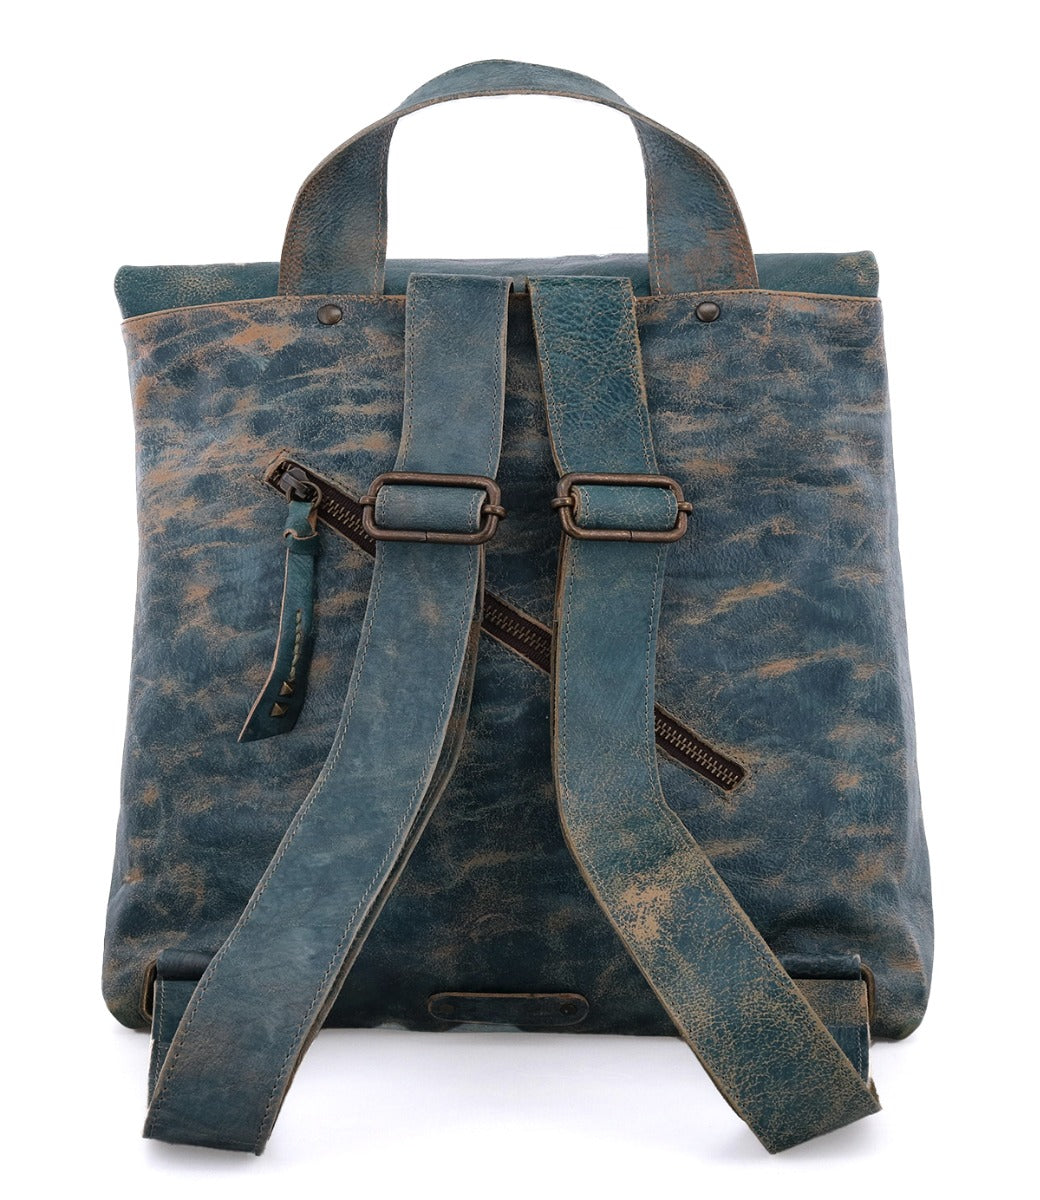 A Howie dark teal leather backpack with a zipper by Bed Stu.